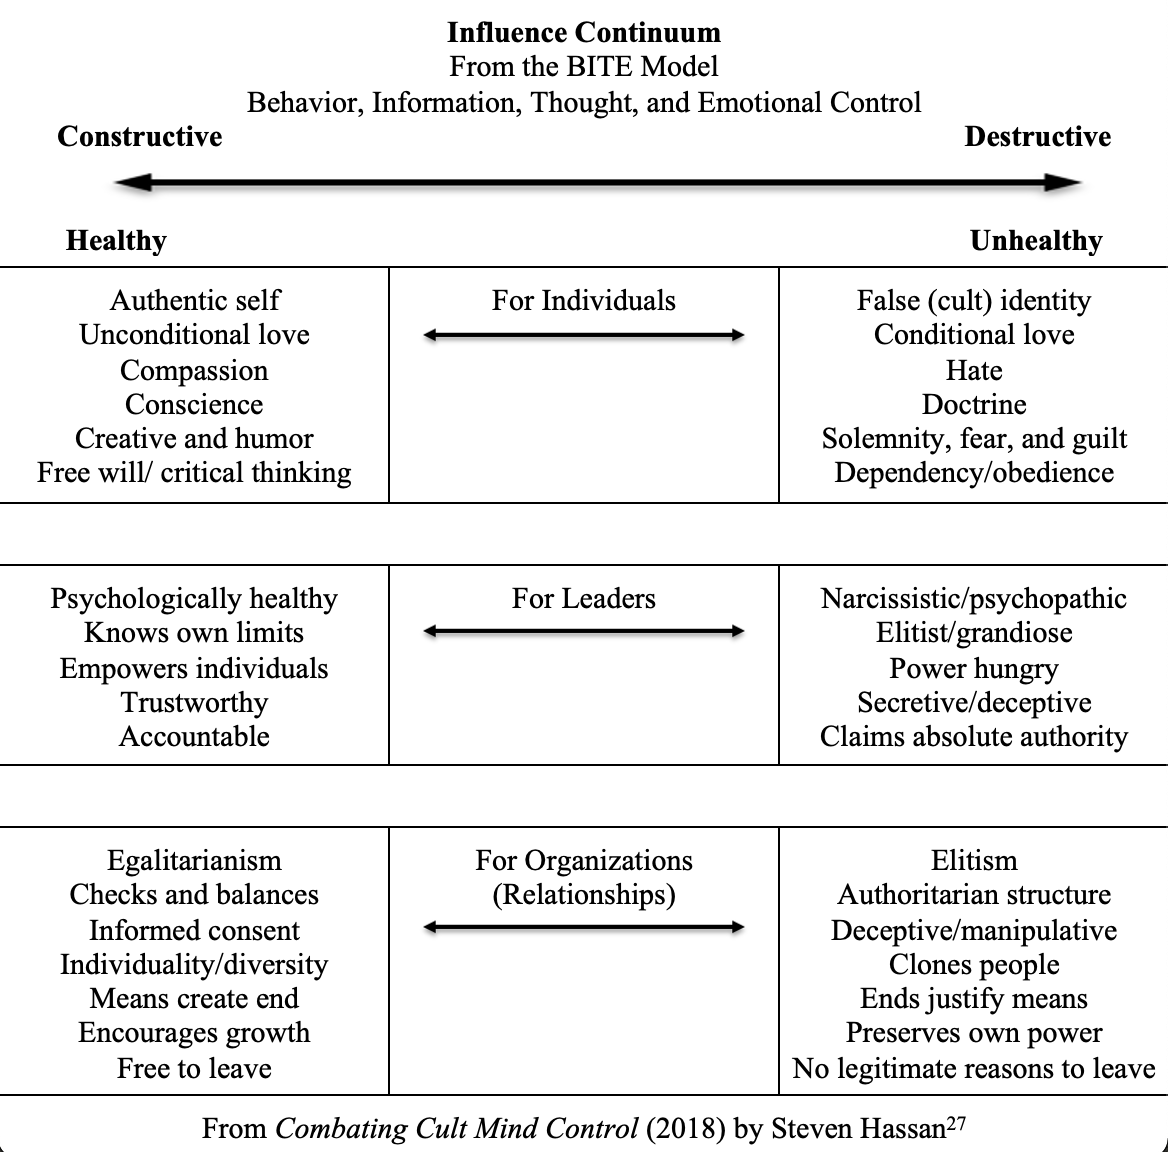 Table 1. The Influence Continuum